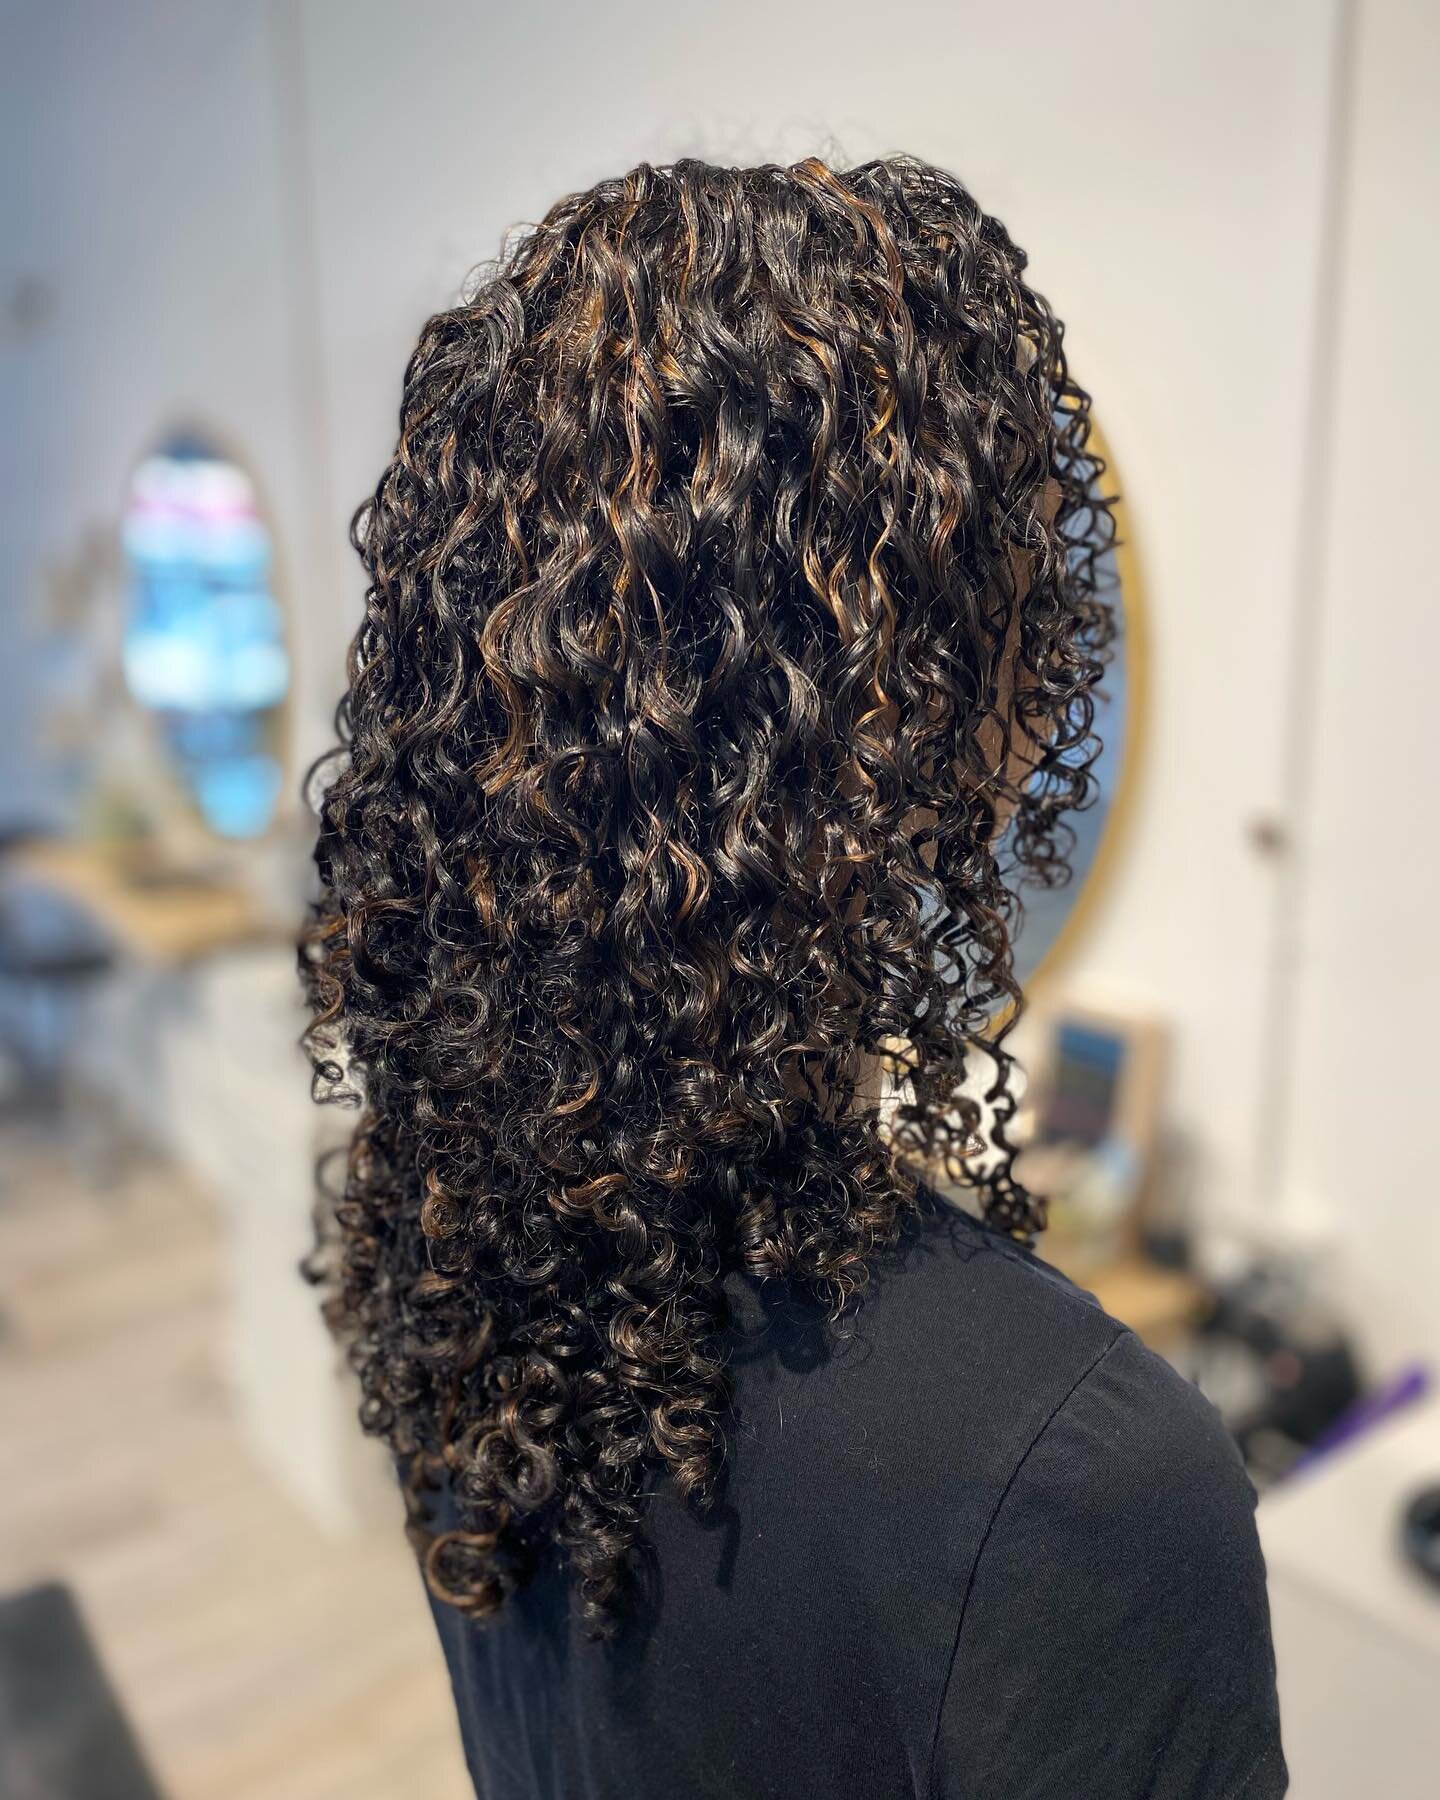 Who&rsquo;s ready to brighten up their curls for summer?? 😍😍😍
Hand painted curls for this beauty was a team effort by @mane.lain  and @garnette_ecohairgirl 

#curlycut #calura #curljourney #curlygirl #okanaganhairstylist #kelownahair #okanagan #cu